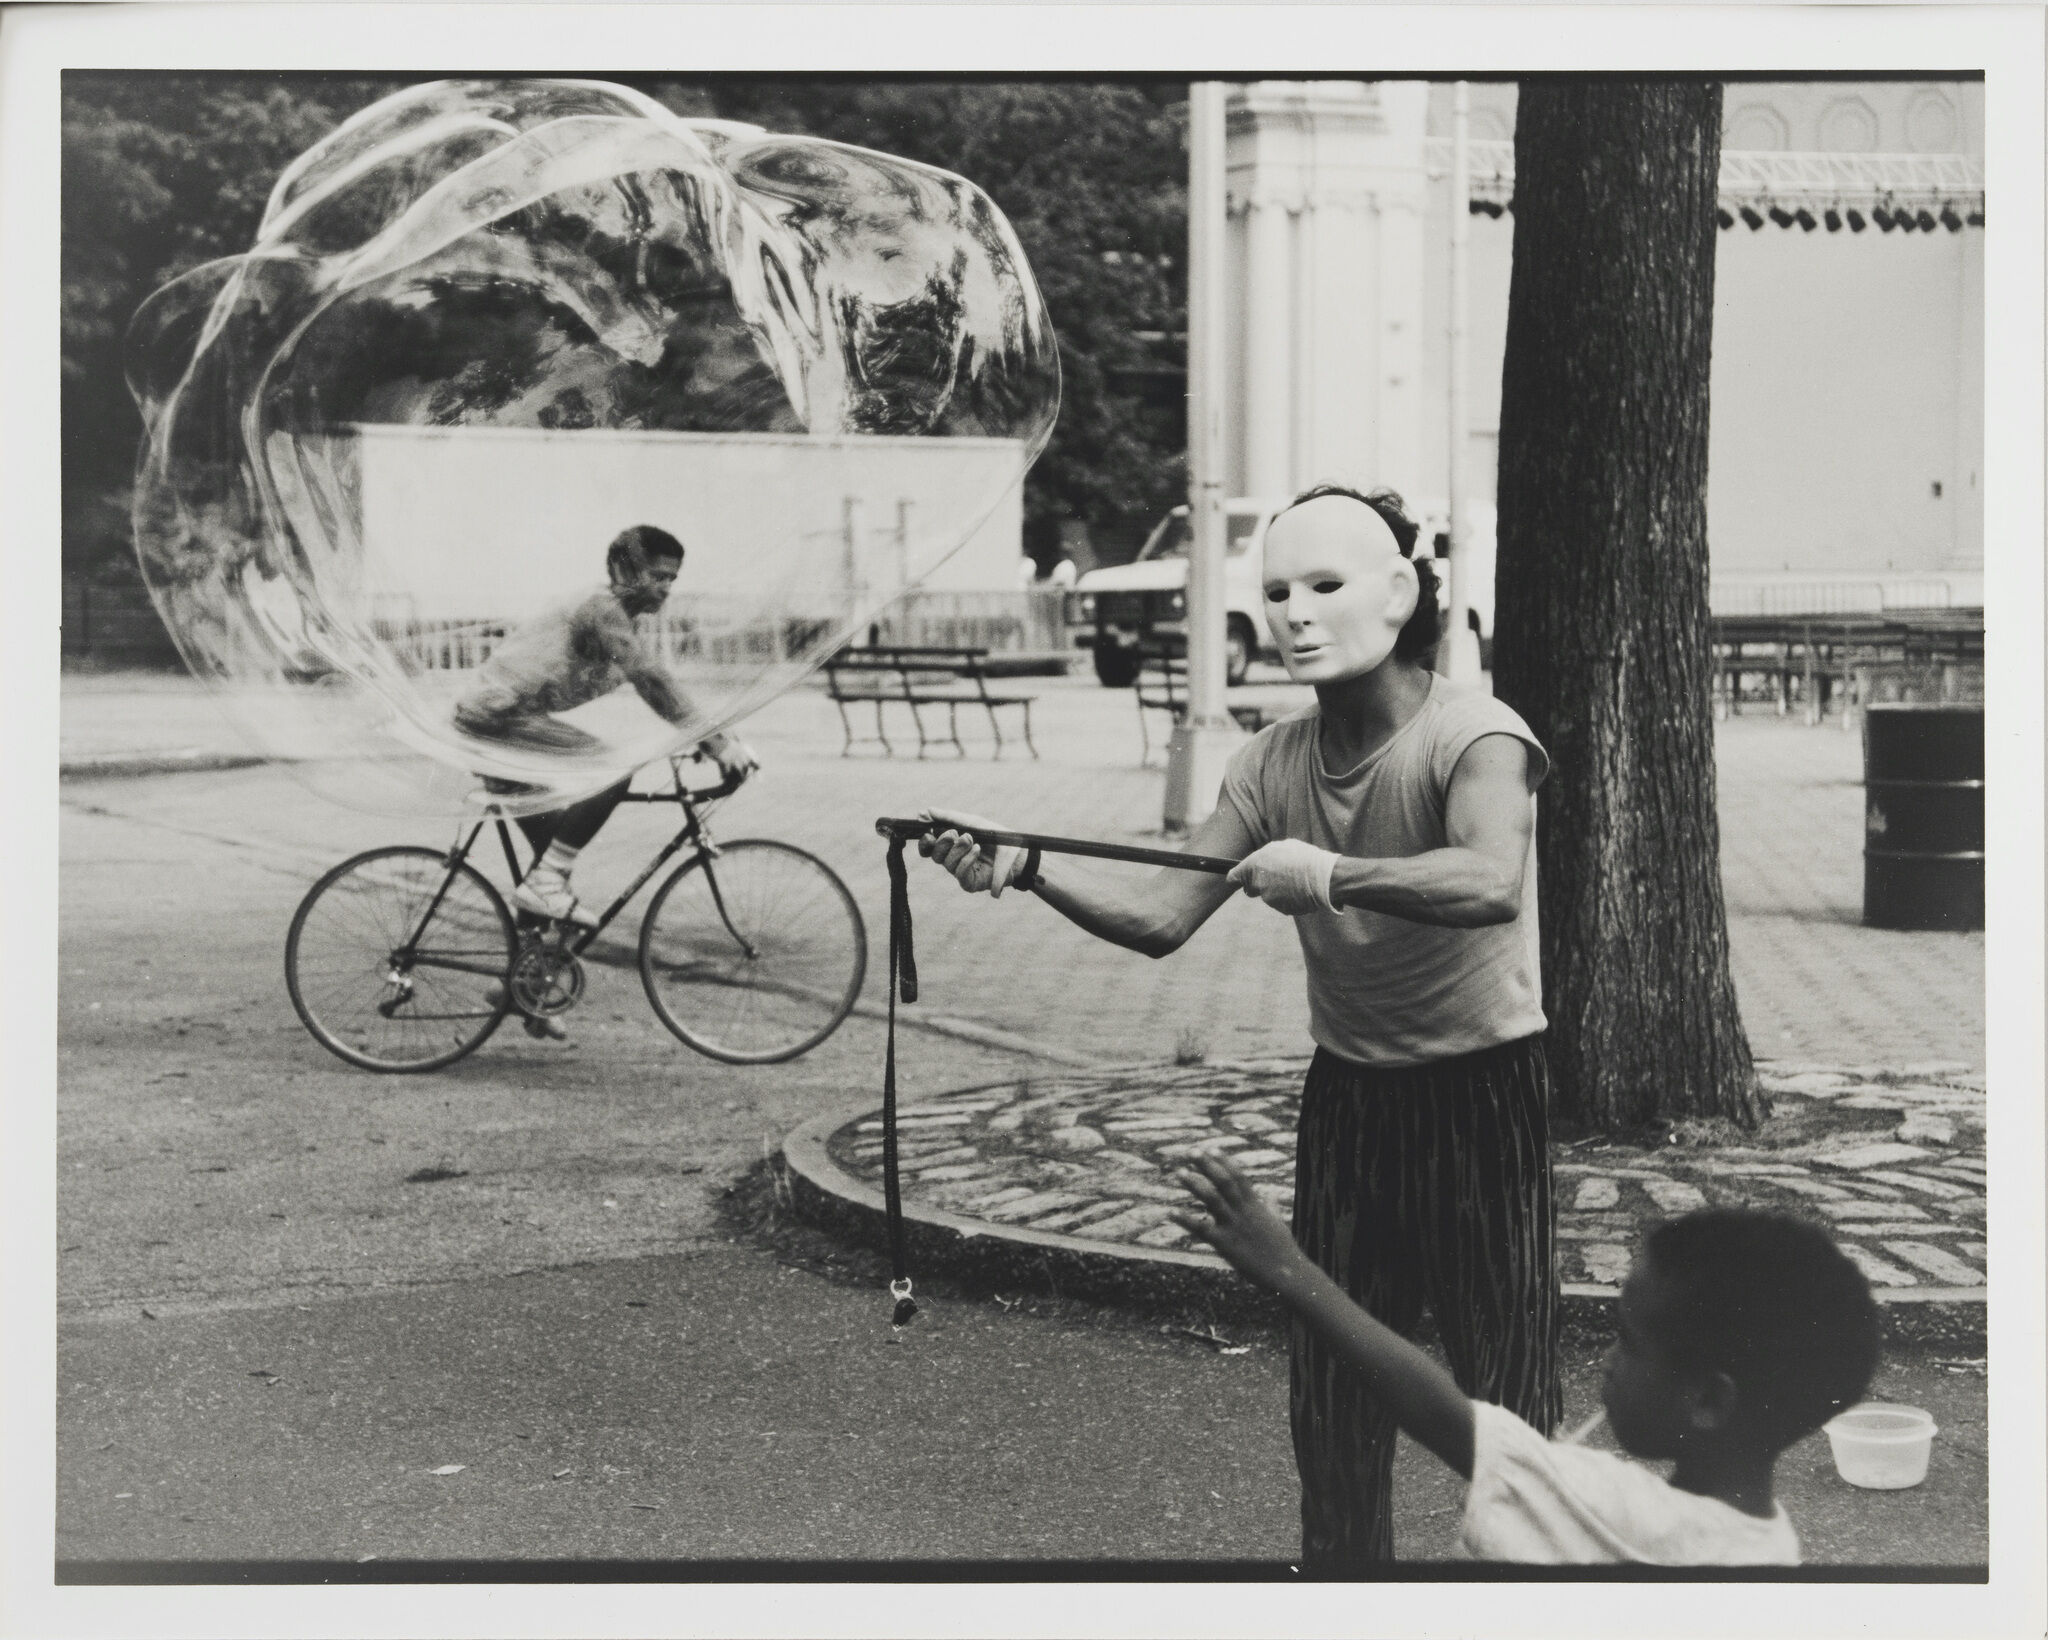 A man in a mask creating an enormous bubble.